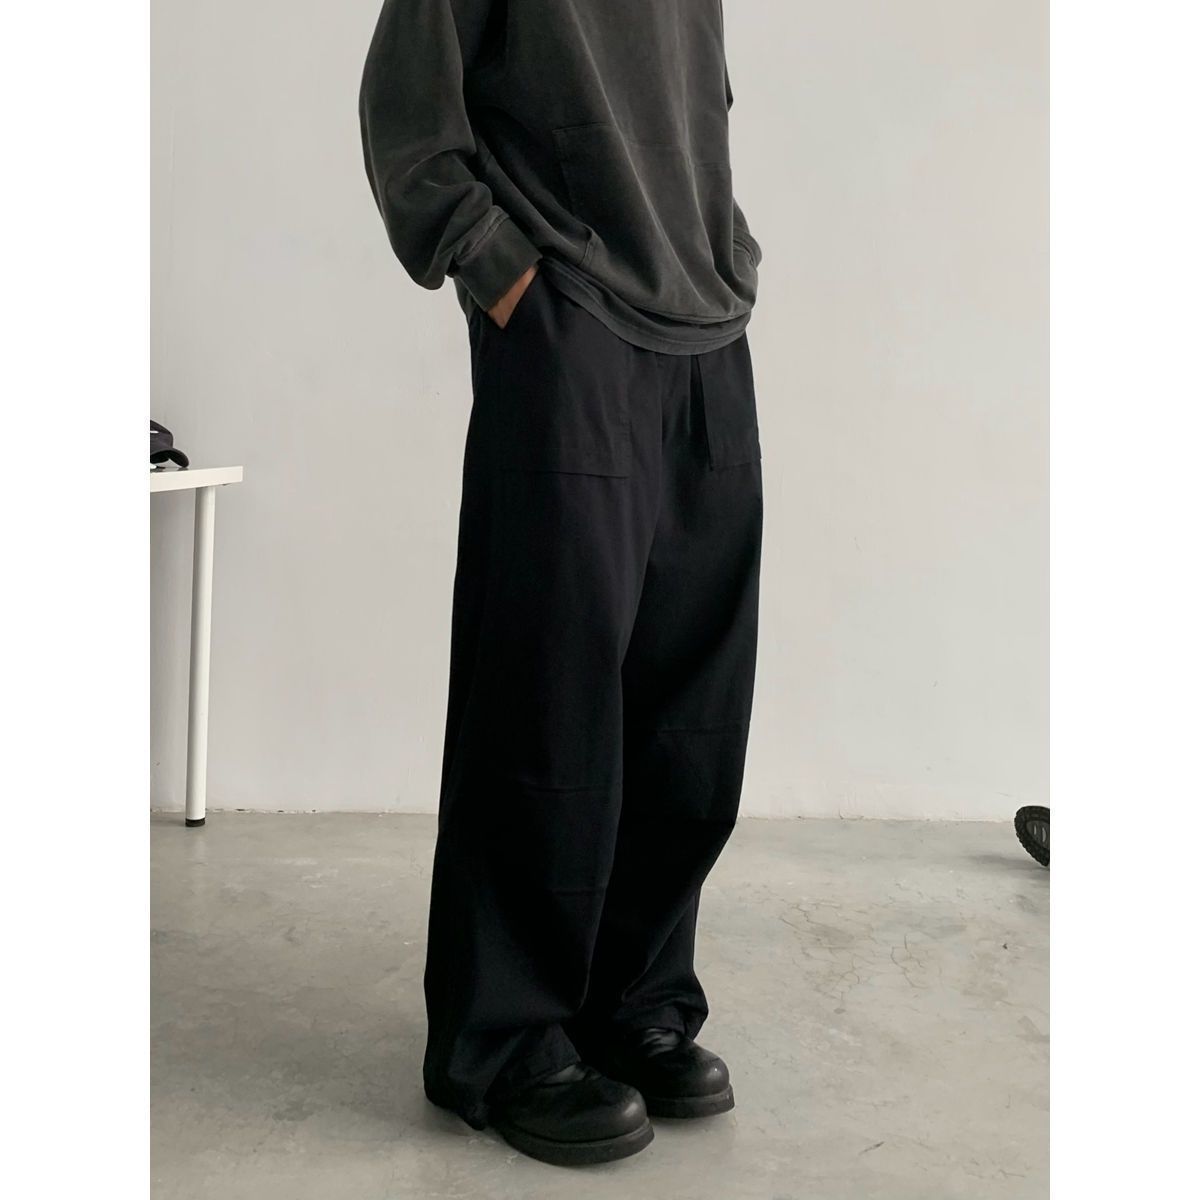 Wanfandu retro men's and women's casual pants overalls Japanese fashion brand loose straight casual American long pants